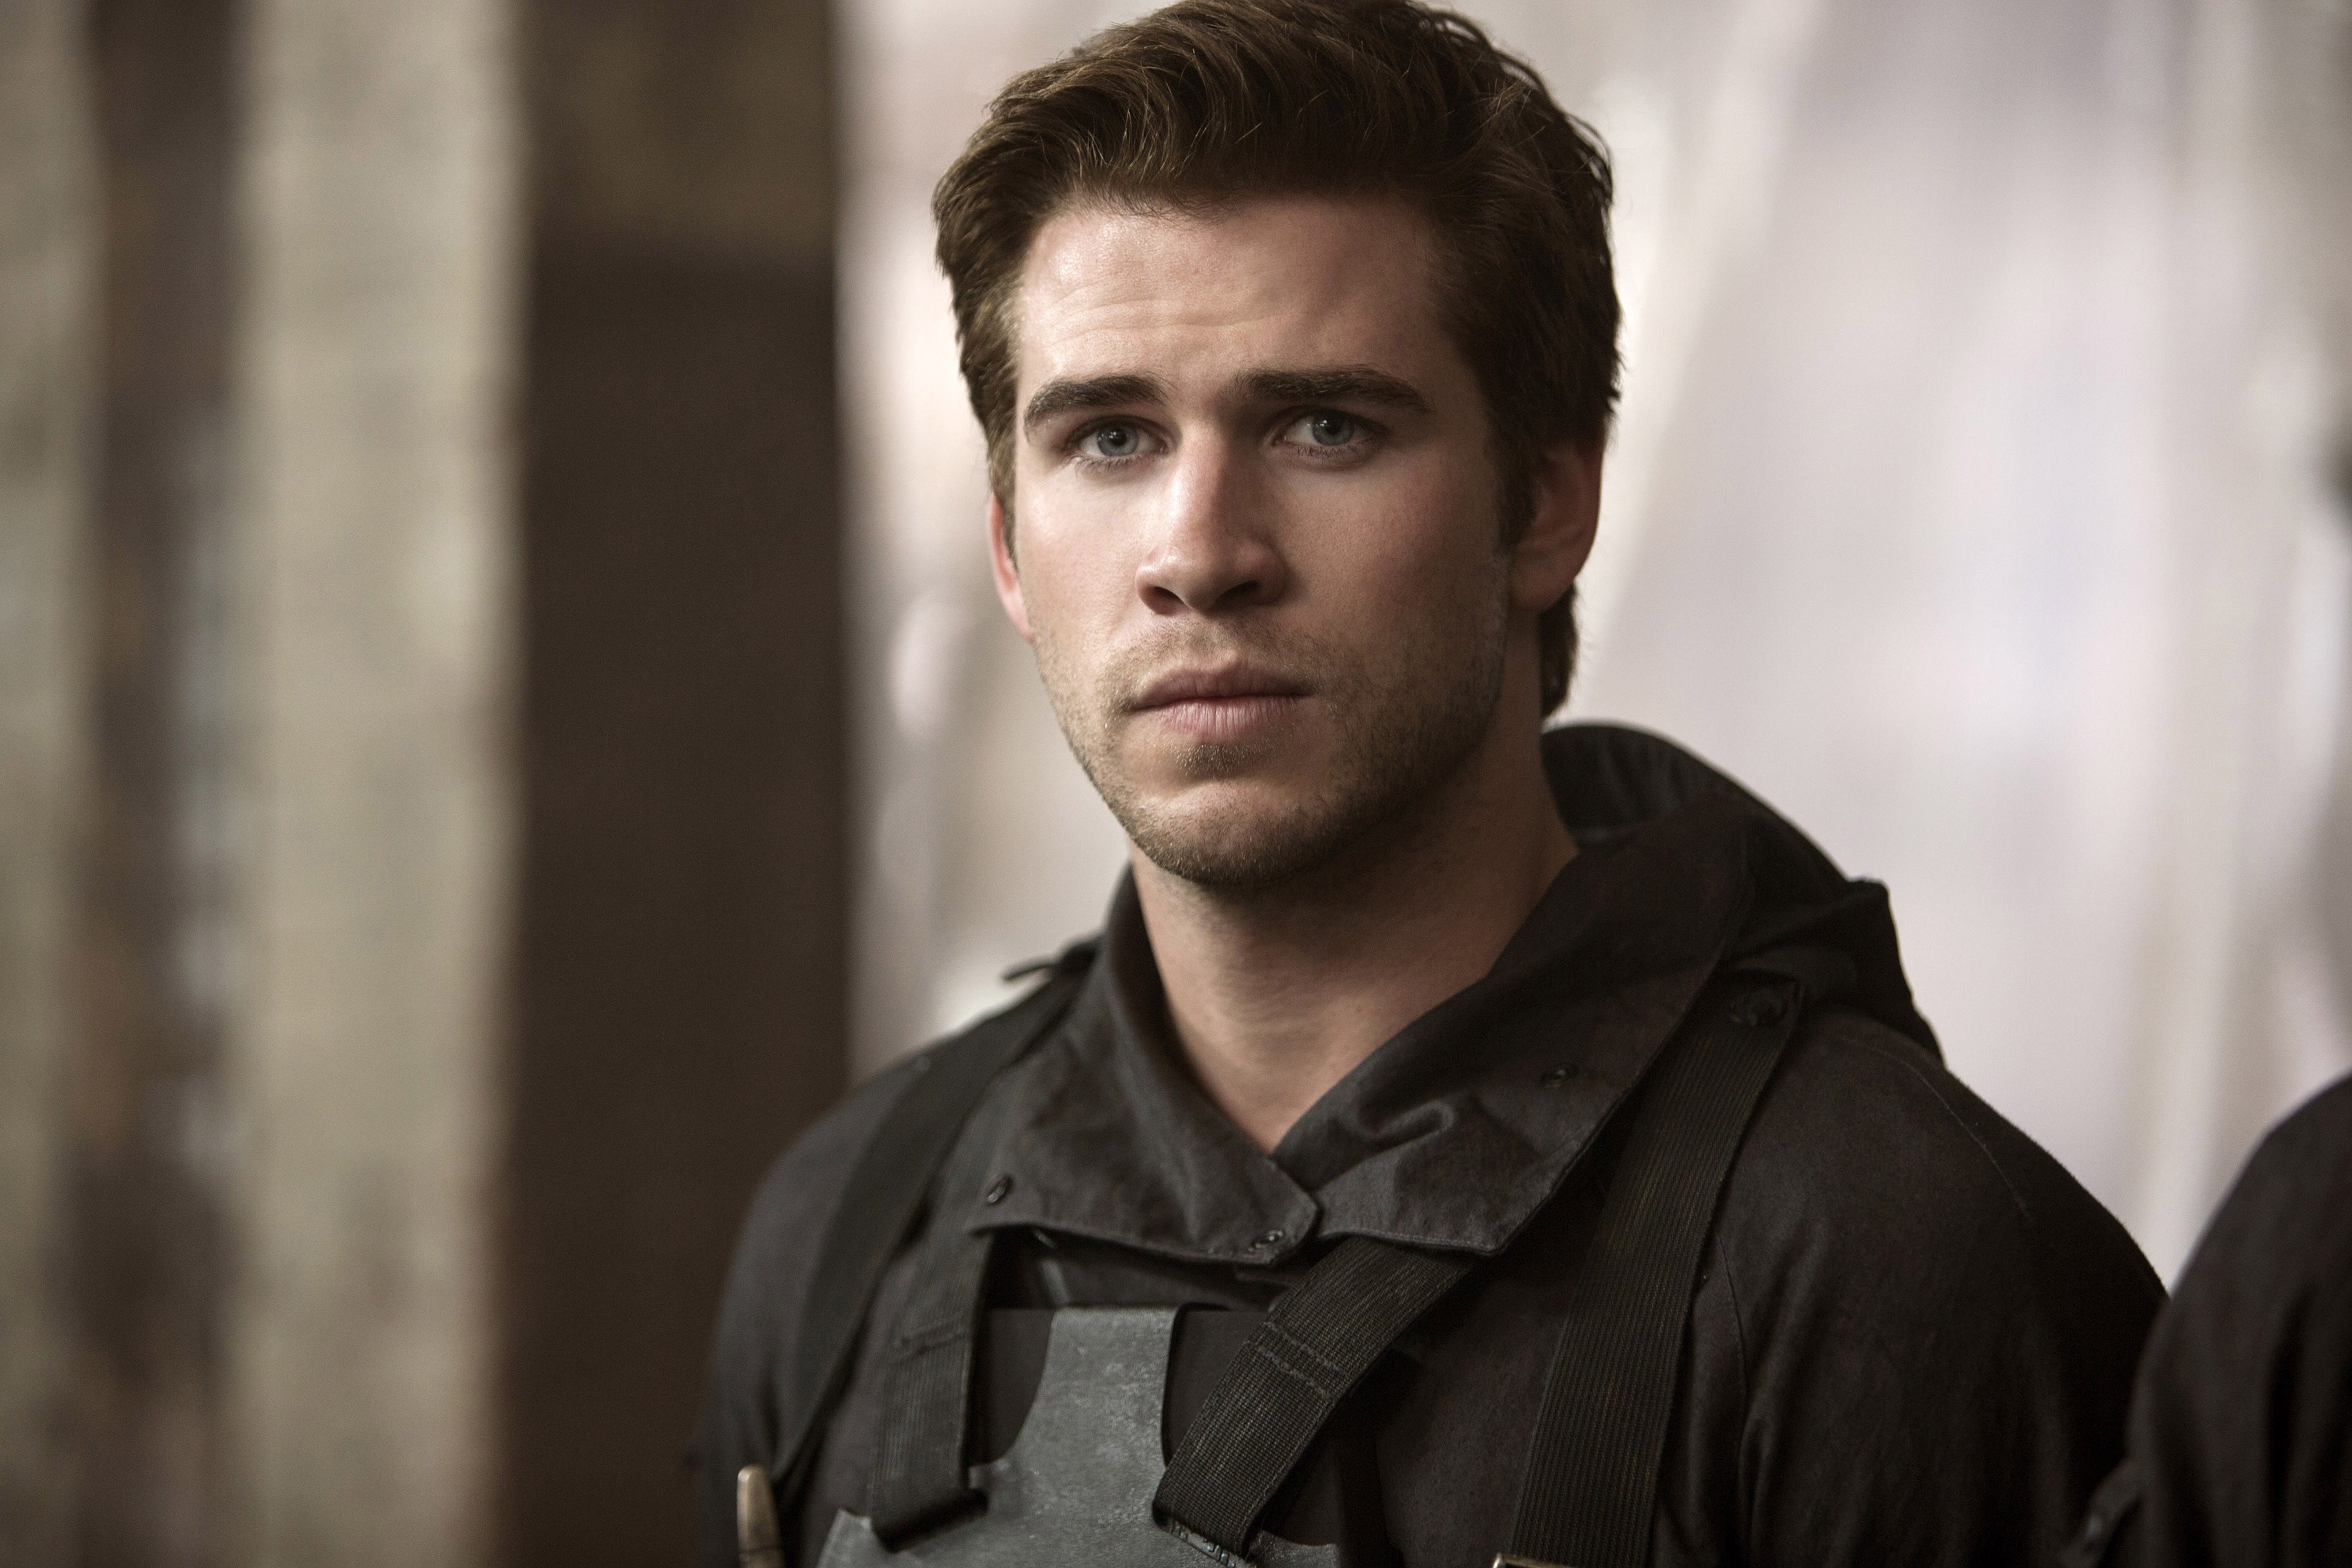 gale hunger games catching fire